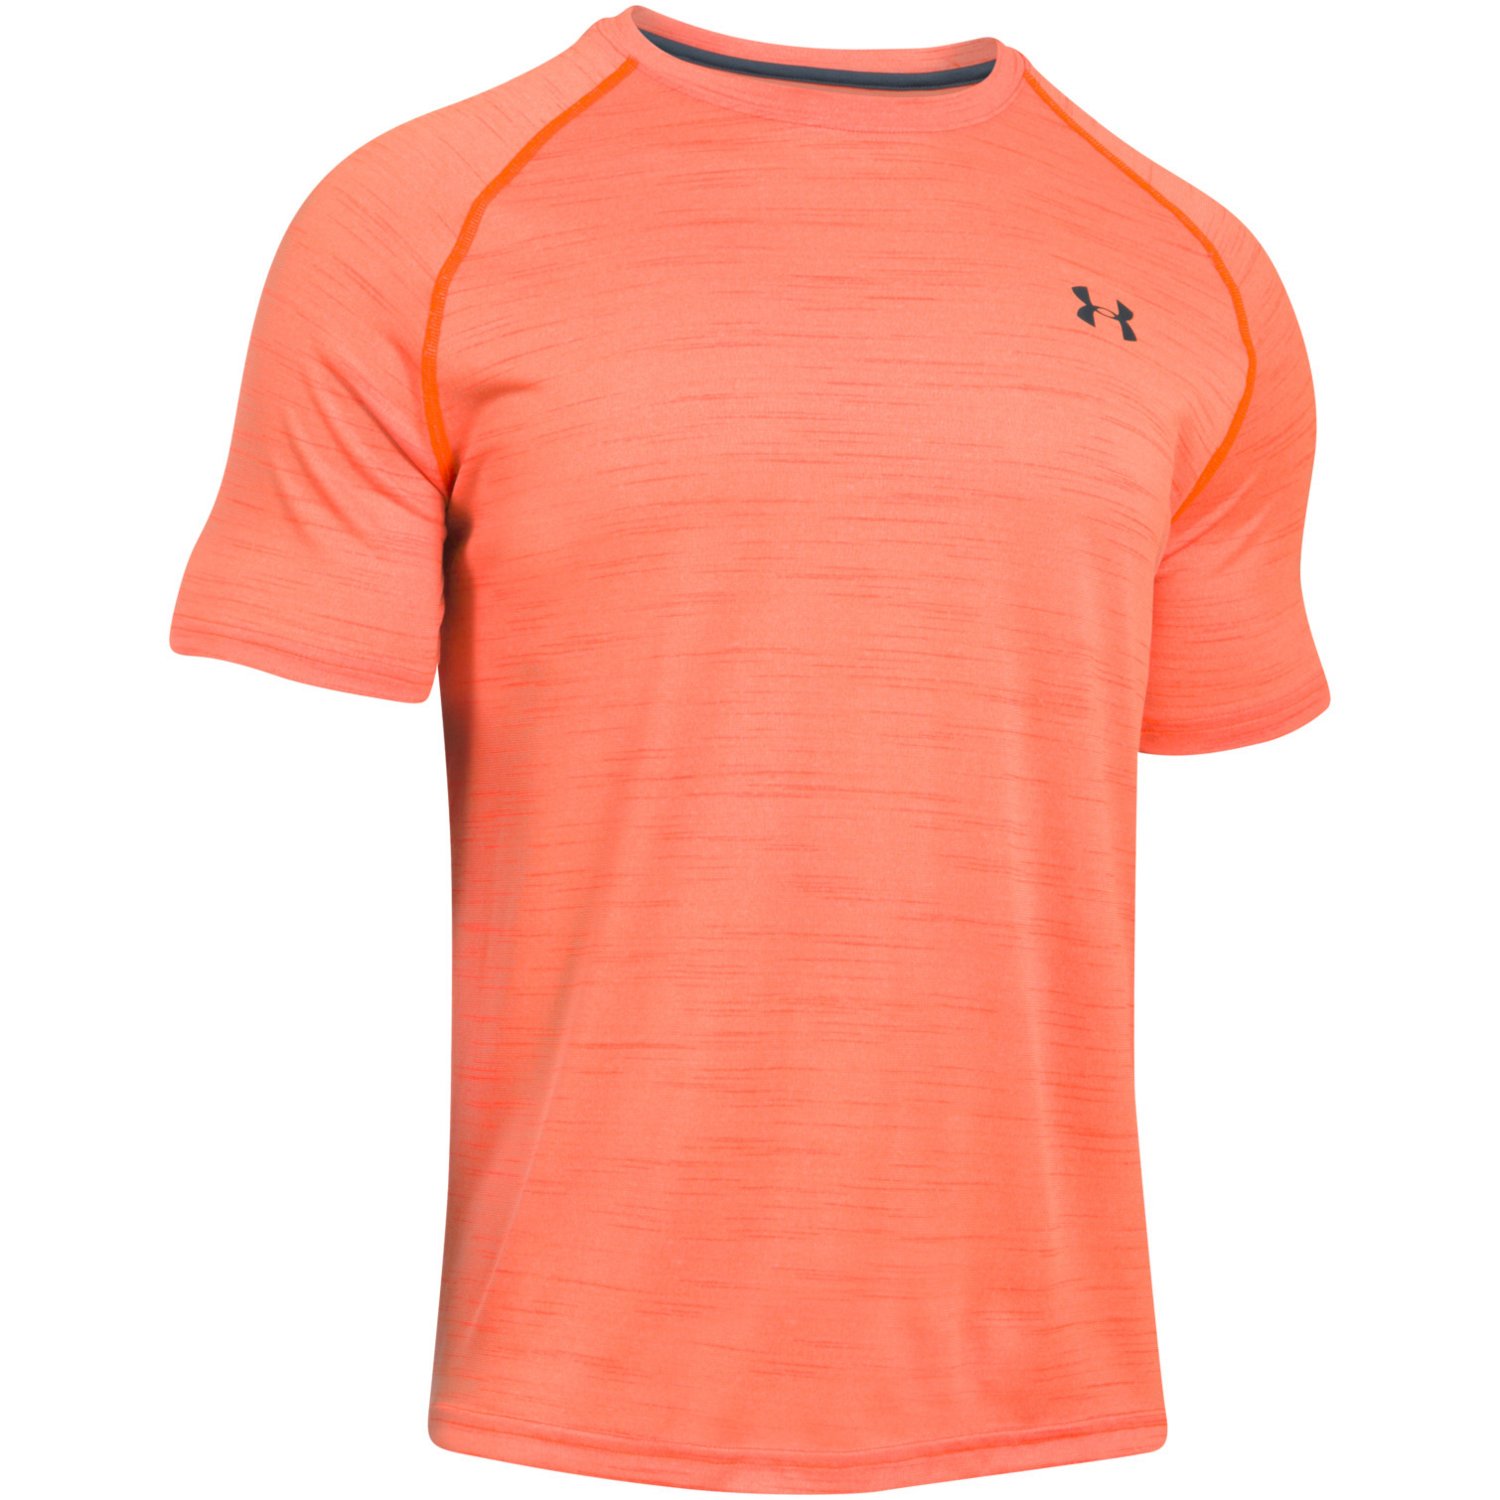 Buy t shirt under armour - 53% OFF!